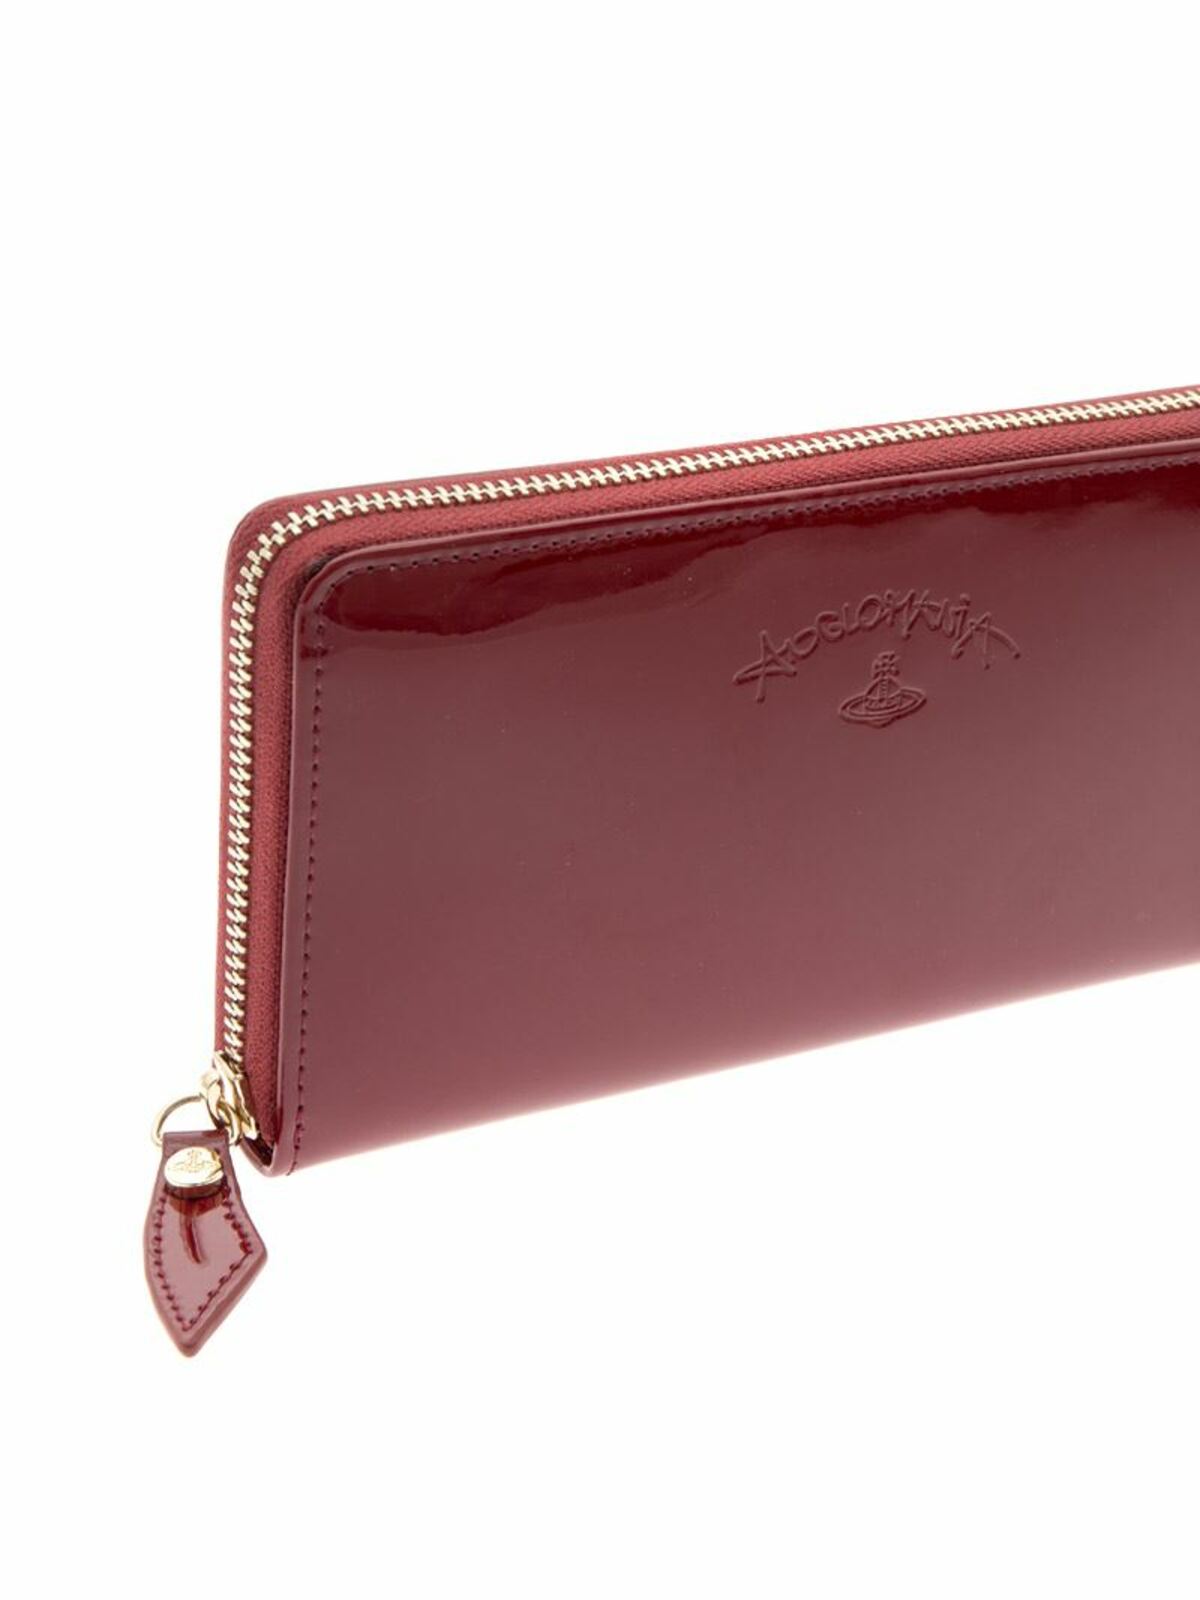 Amazon.co.jp: Vivienne Westwood Emma Trifold Wallet with Coin Purse, Black  : Clothing, Shoes & Jewelry